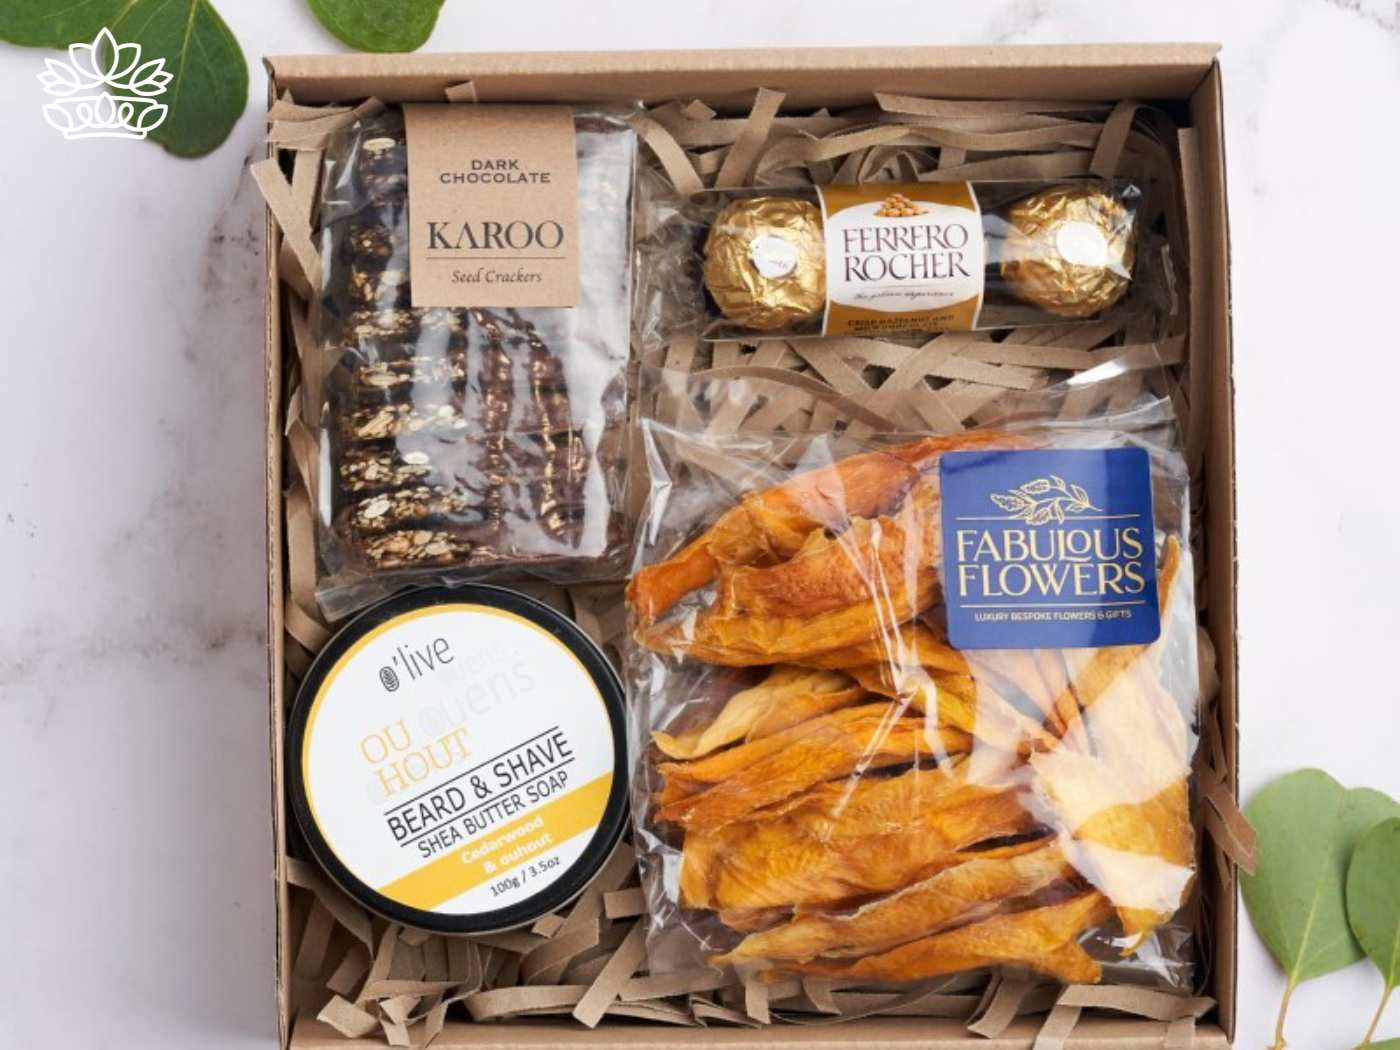 Elegantly arranged gift box containing dark chocolate seed crackers, Ferrero Rocher chocolates, dried mango slices, and a container of beard and shave soap, branded by Fabulous Flowers and Gifts. Presented with a touch of greenery for a heartfelt delivery to guest houses and hotels.